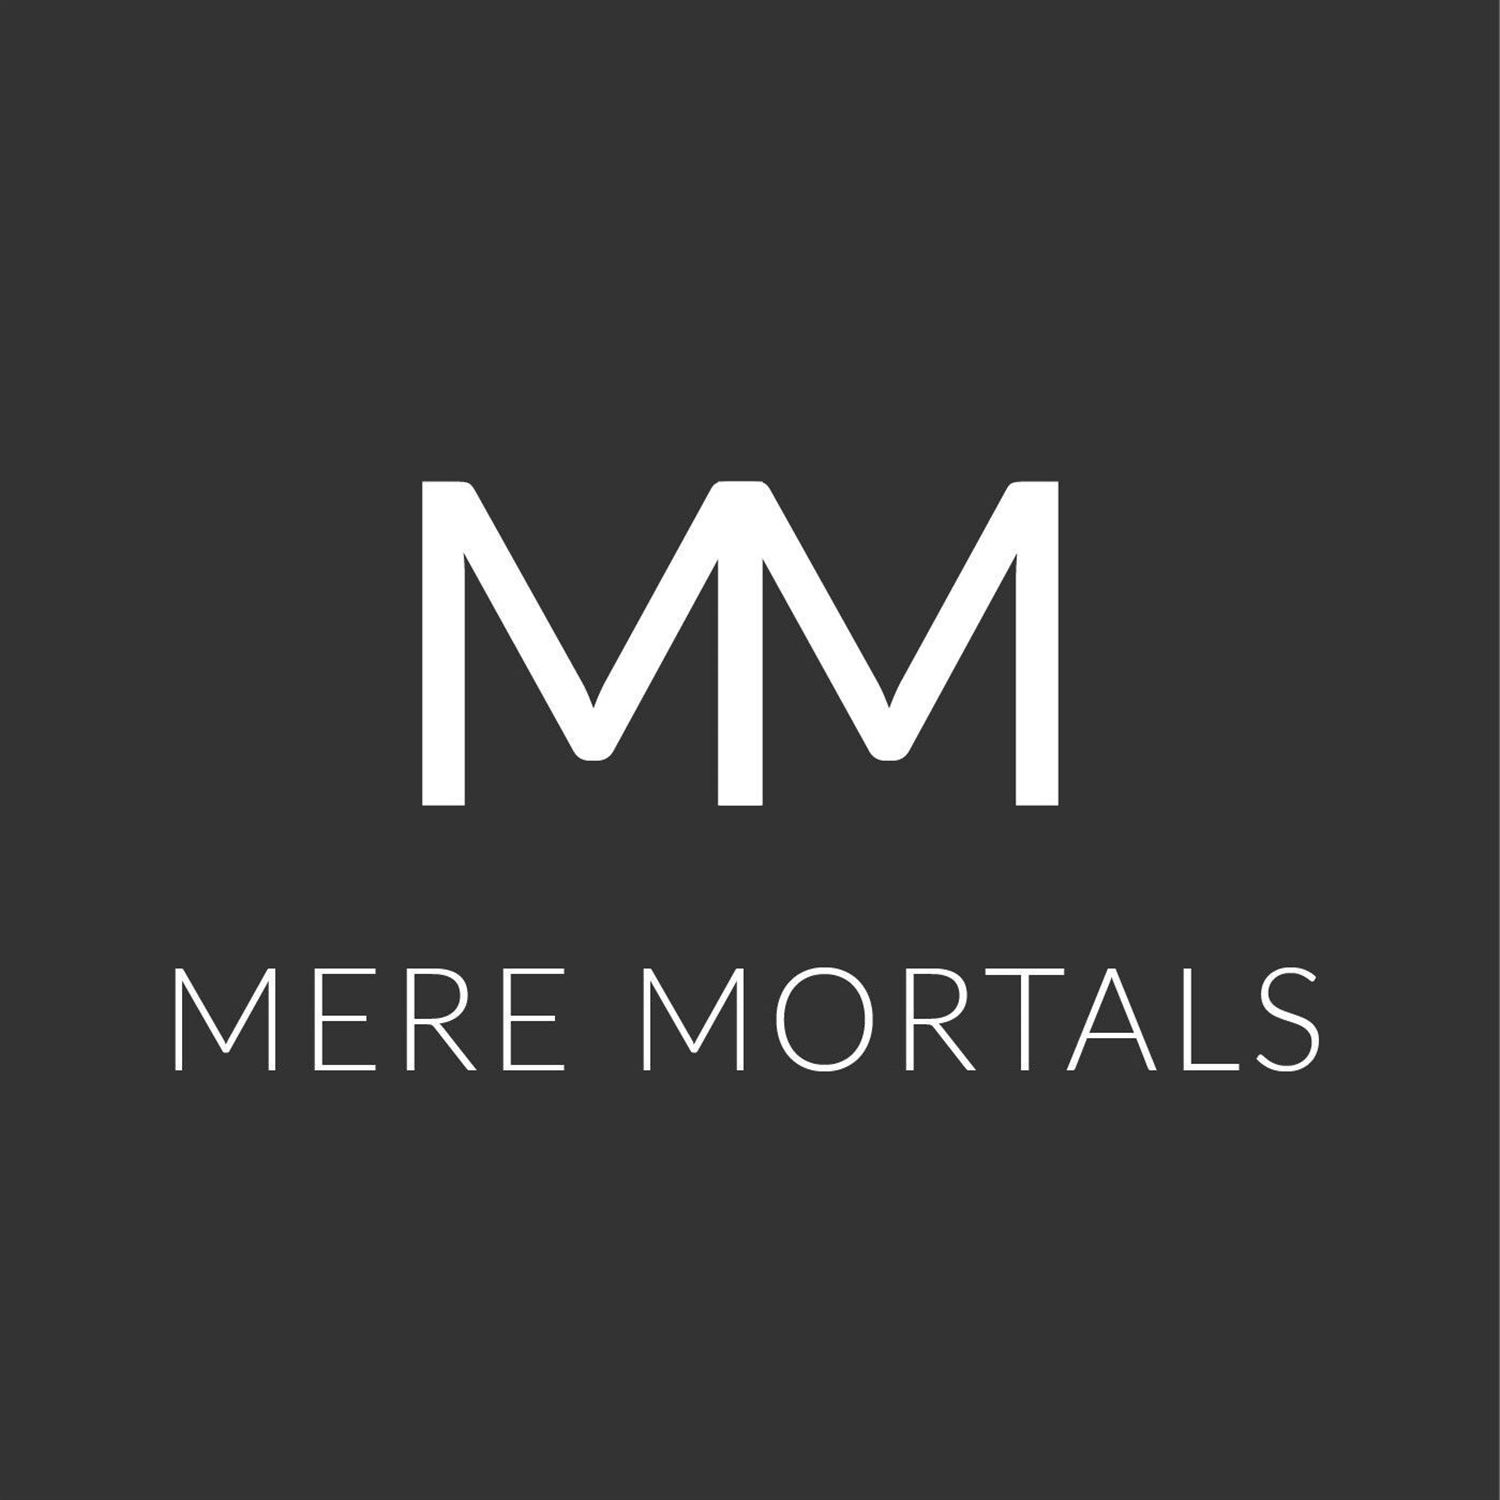 Deciding What Is Fair (Mere Mortals Episode #47 - Equality & Meritocracy)